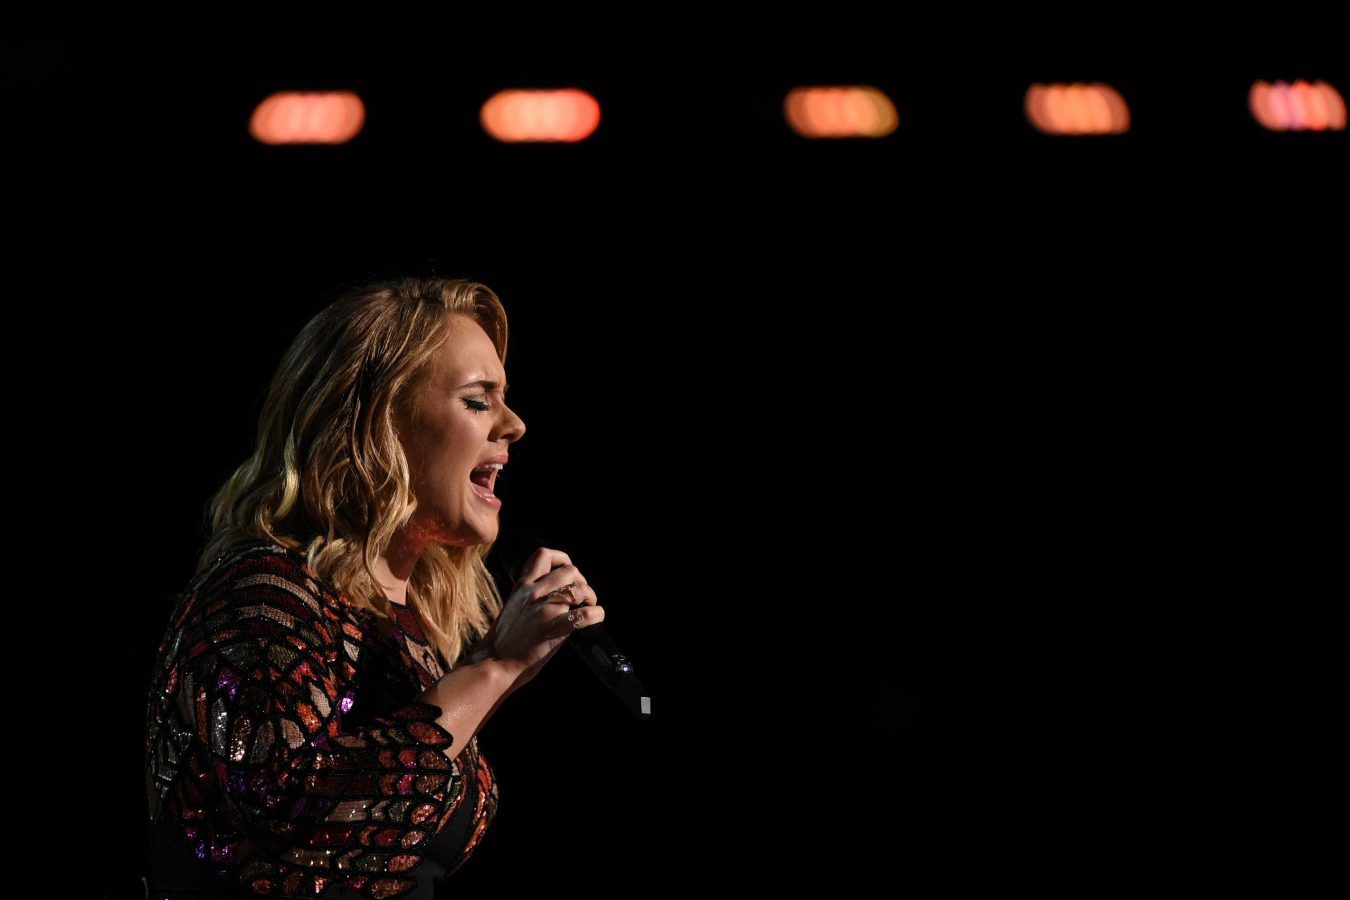 Adele’s rescheduled residency dates for ‘Weekends with Adele’ in Las Vegas